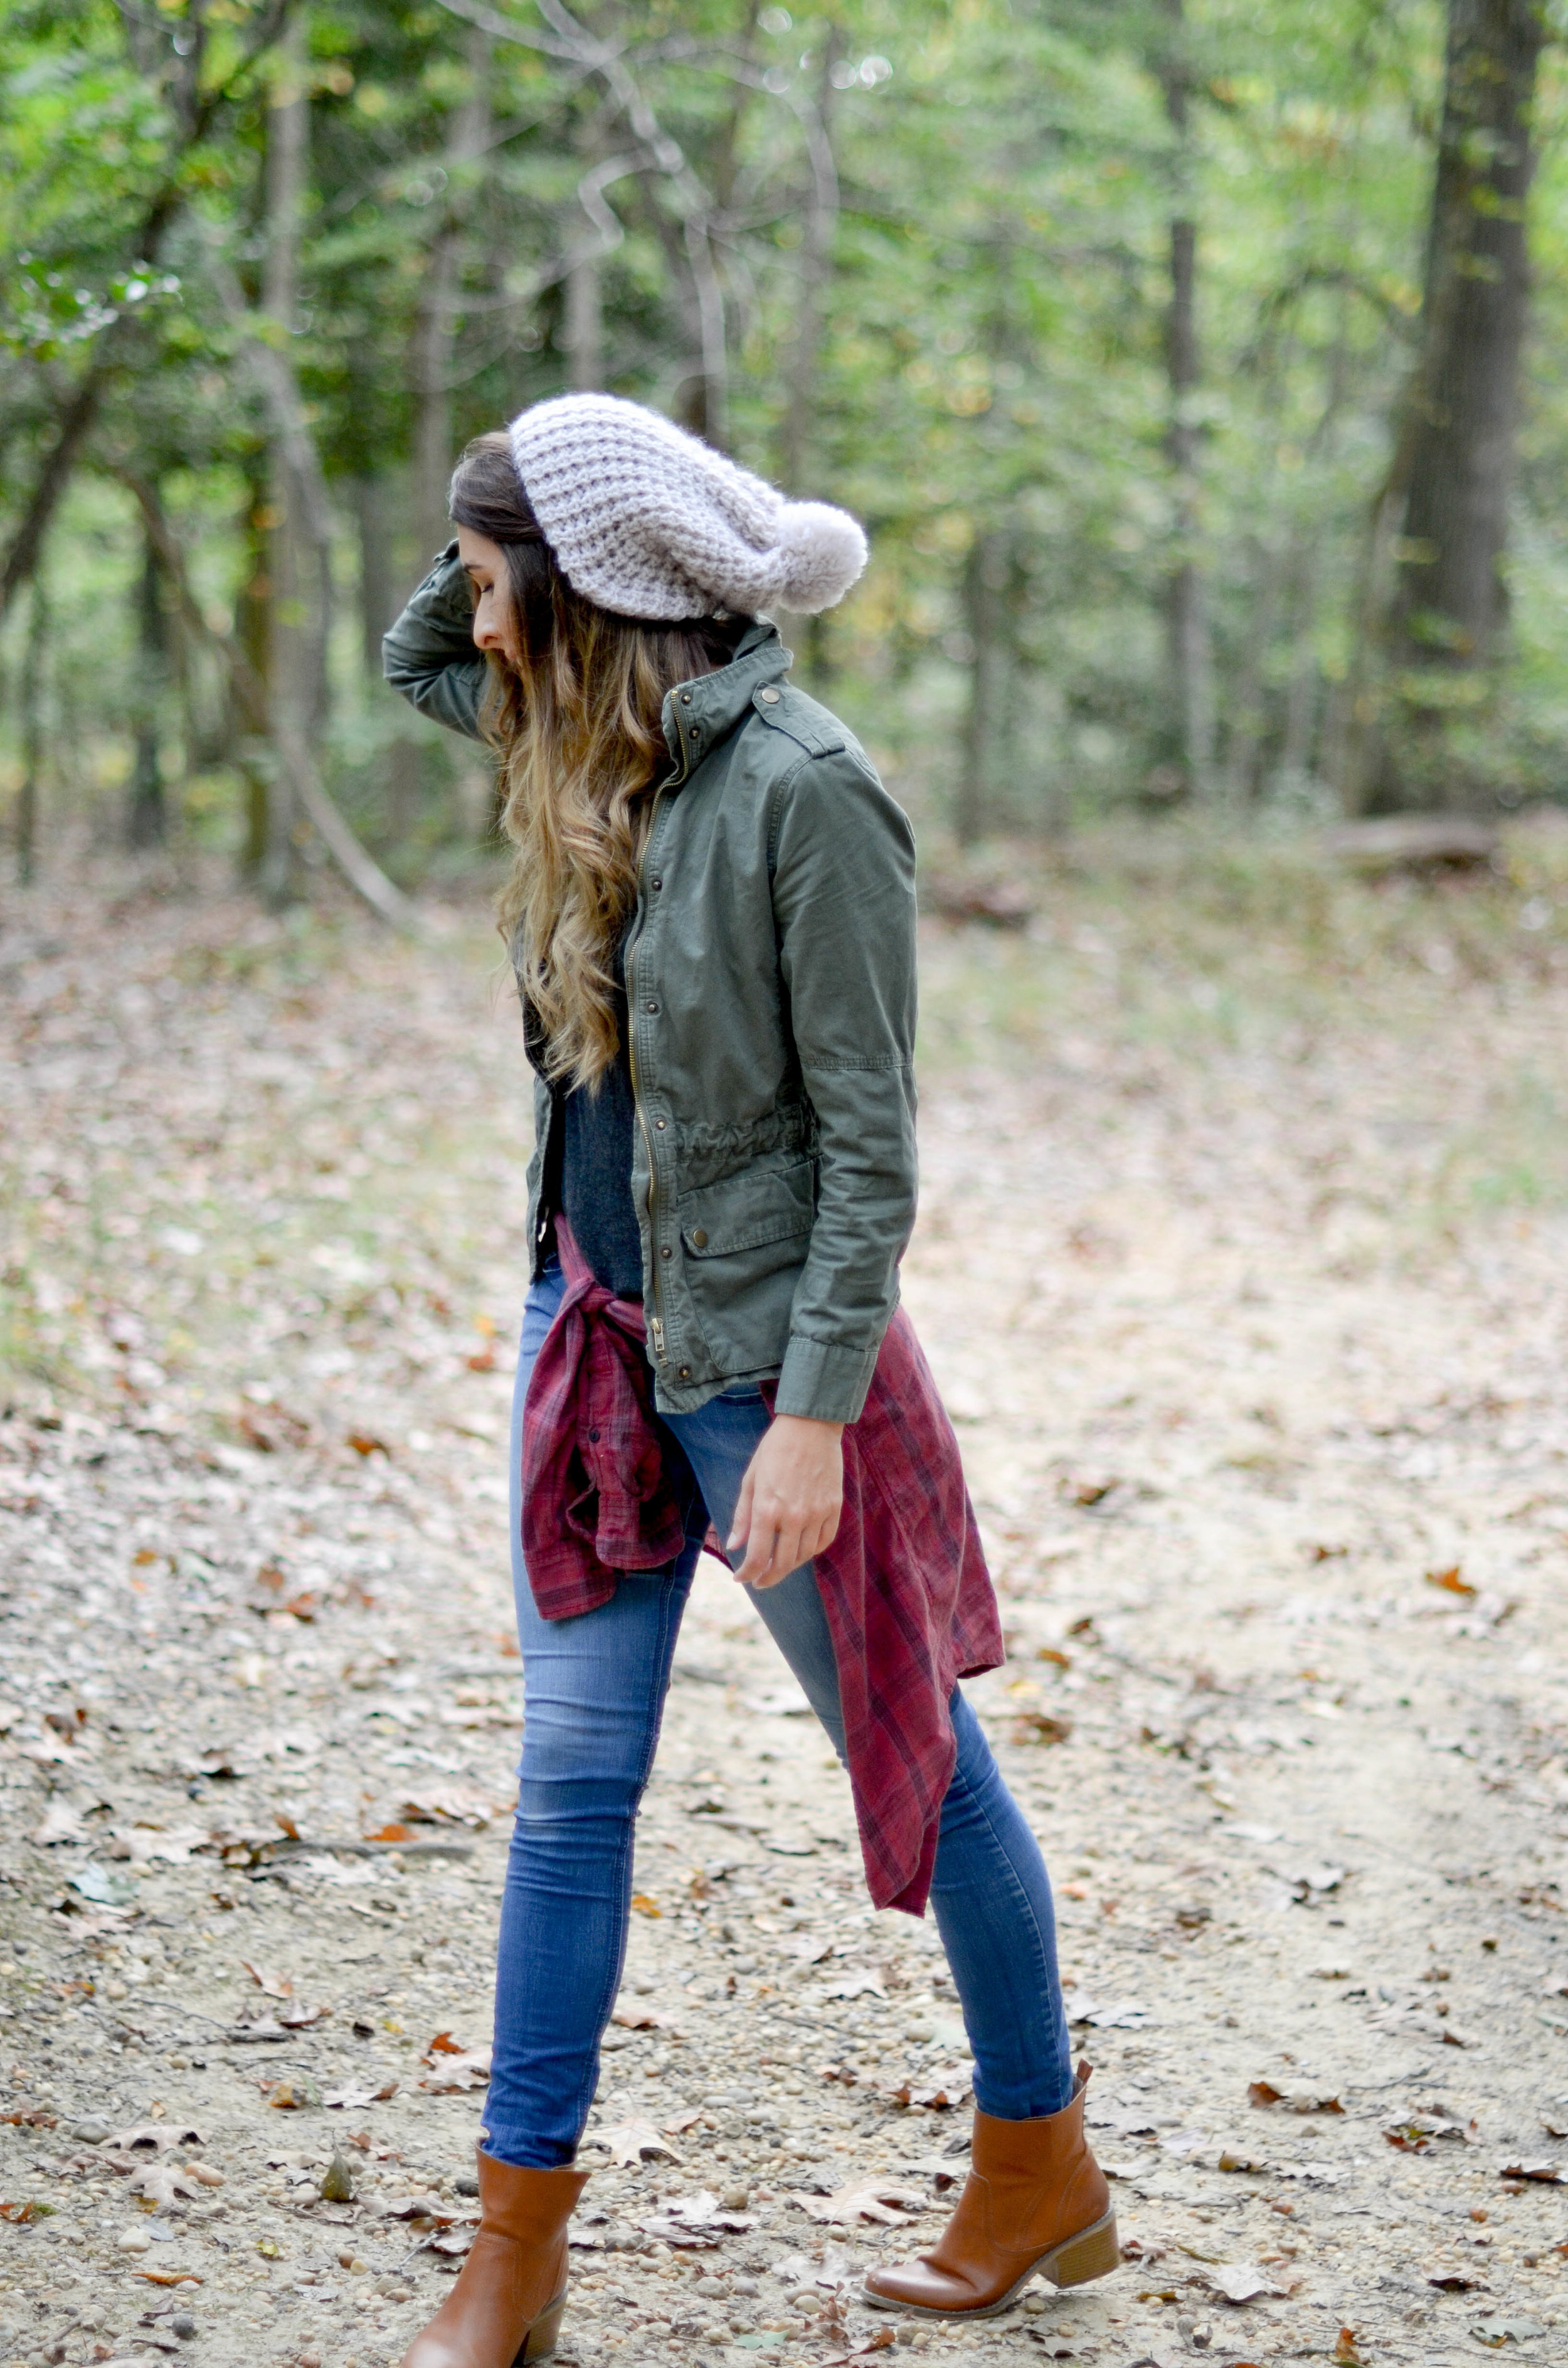 Easy Simple Everyday Fall Style with Plaid and Slouchy Hat by Josie Michelle Davis